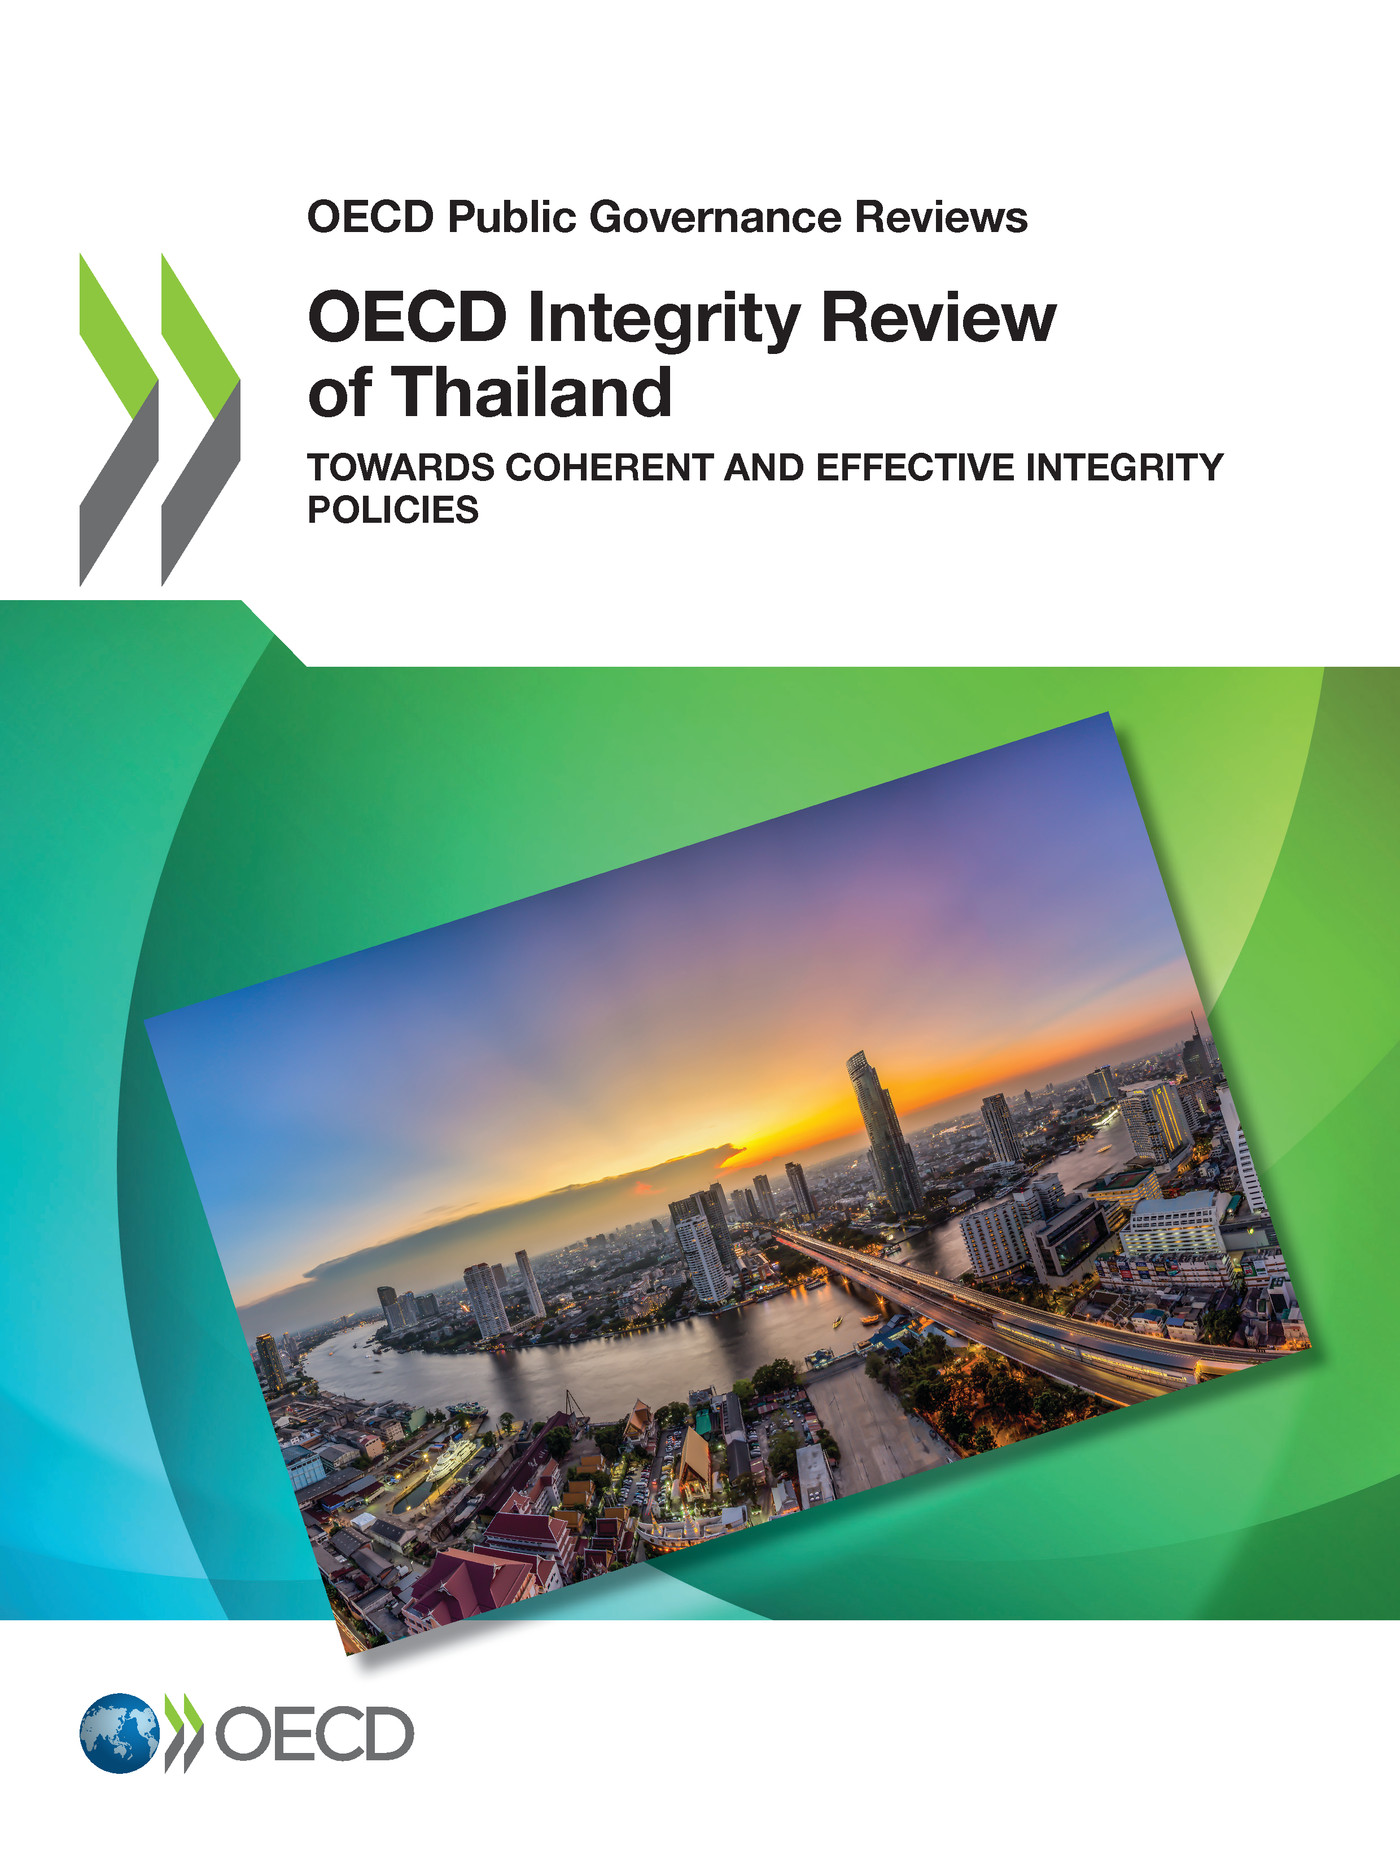 OECD Integrity Review of Thailand -  Collectif - OCDE / OECD